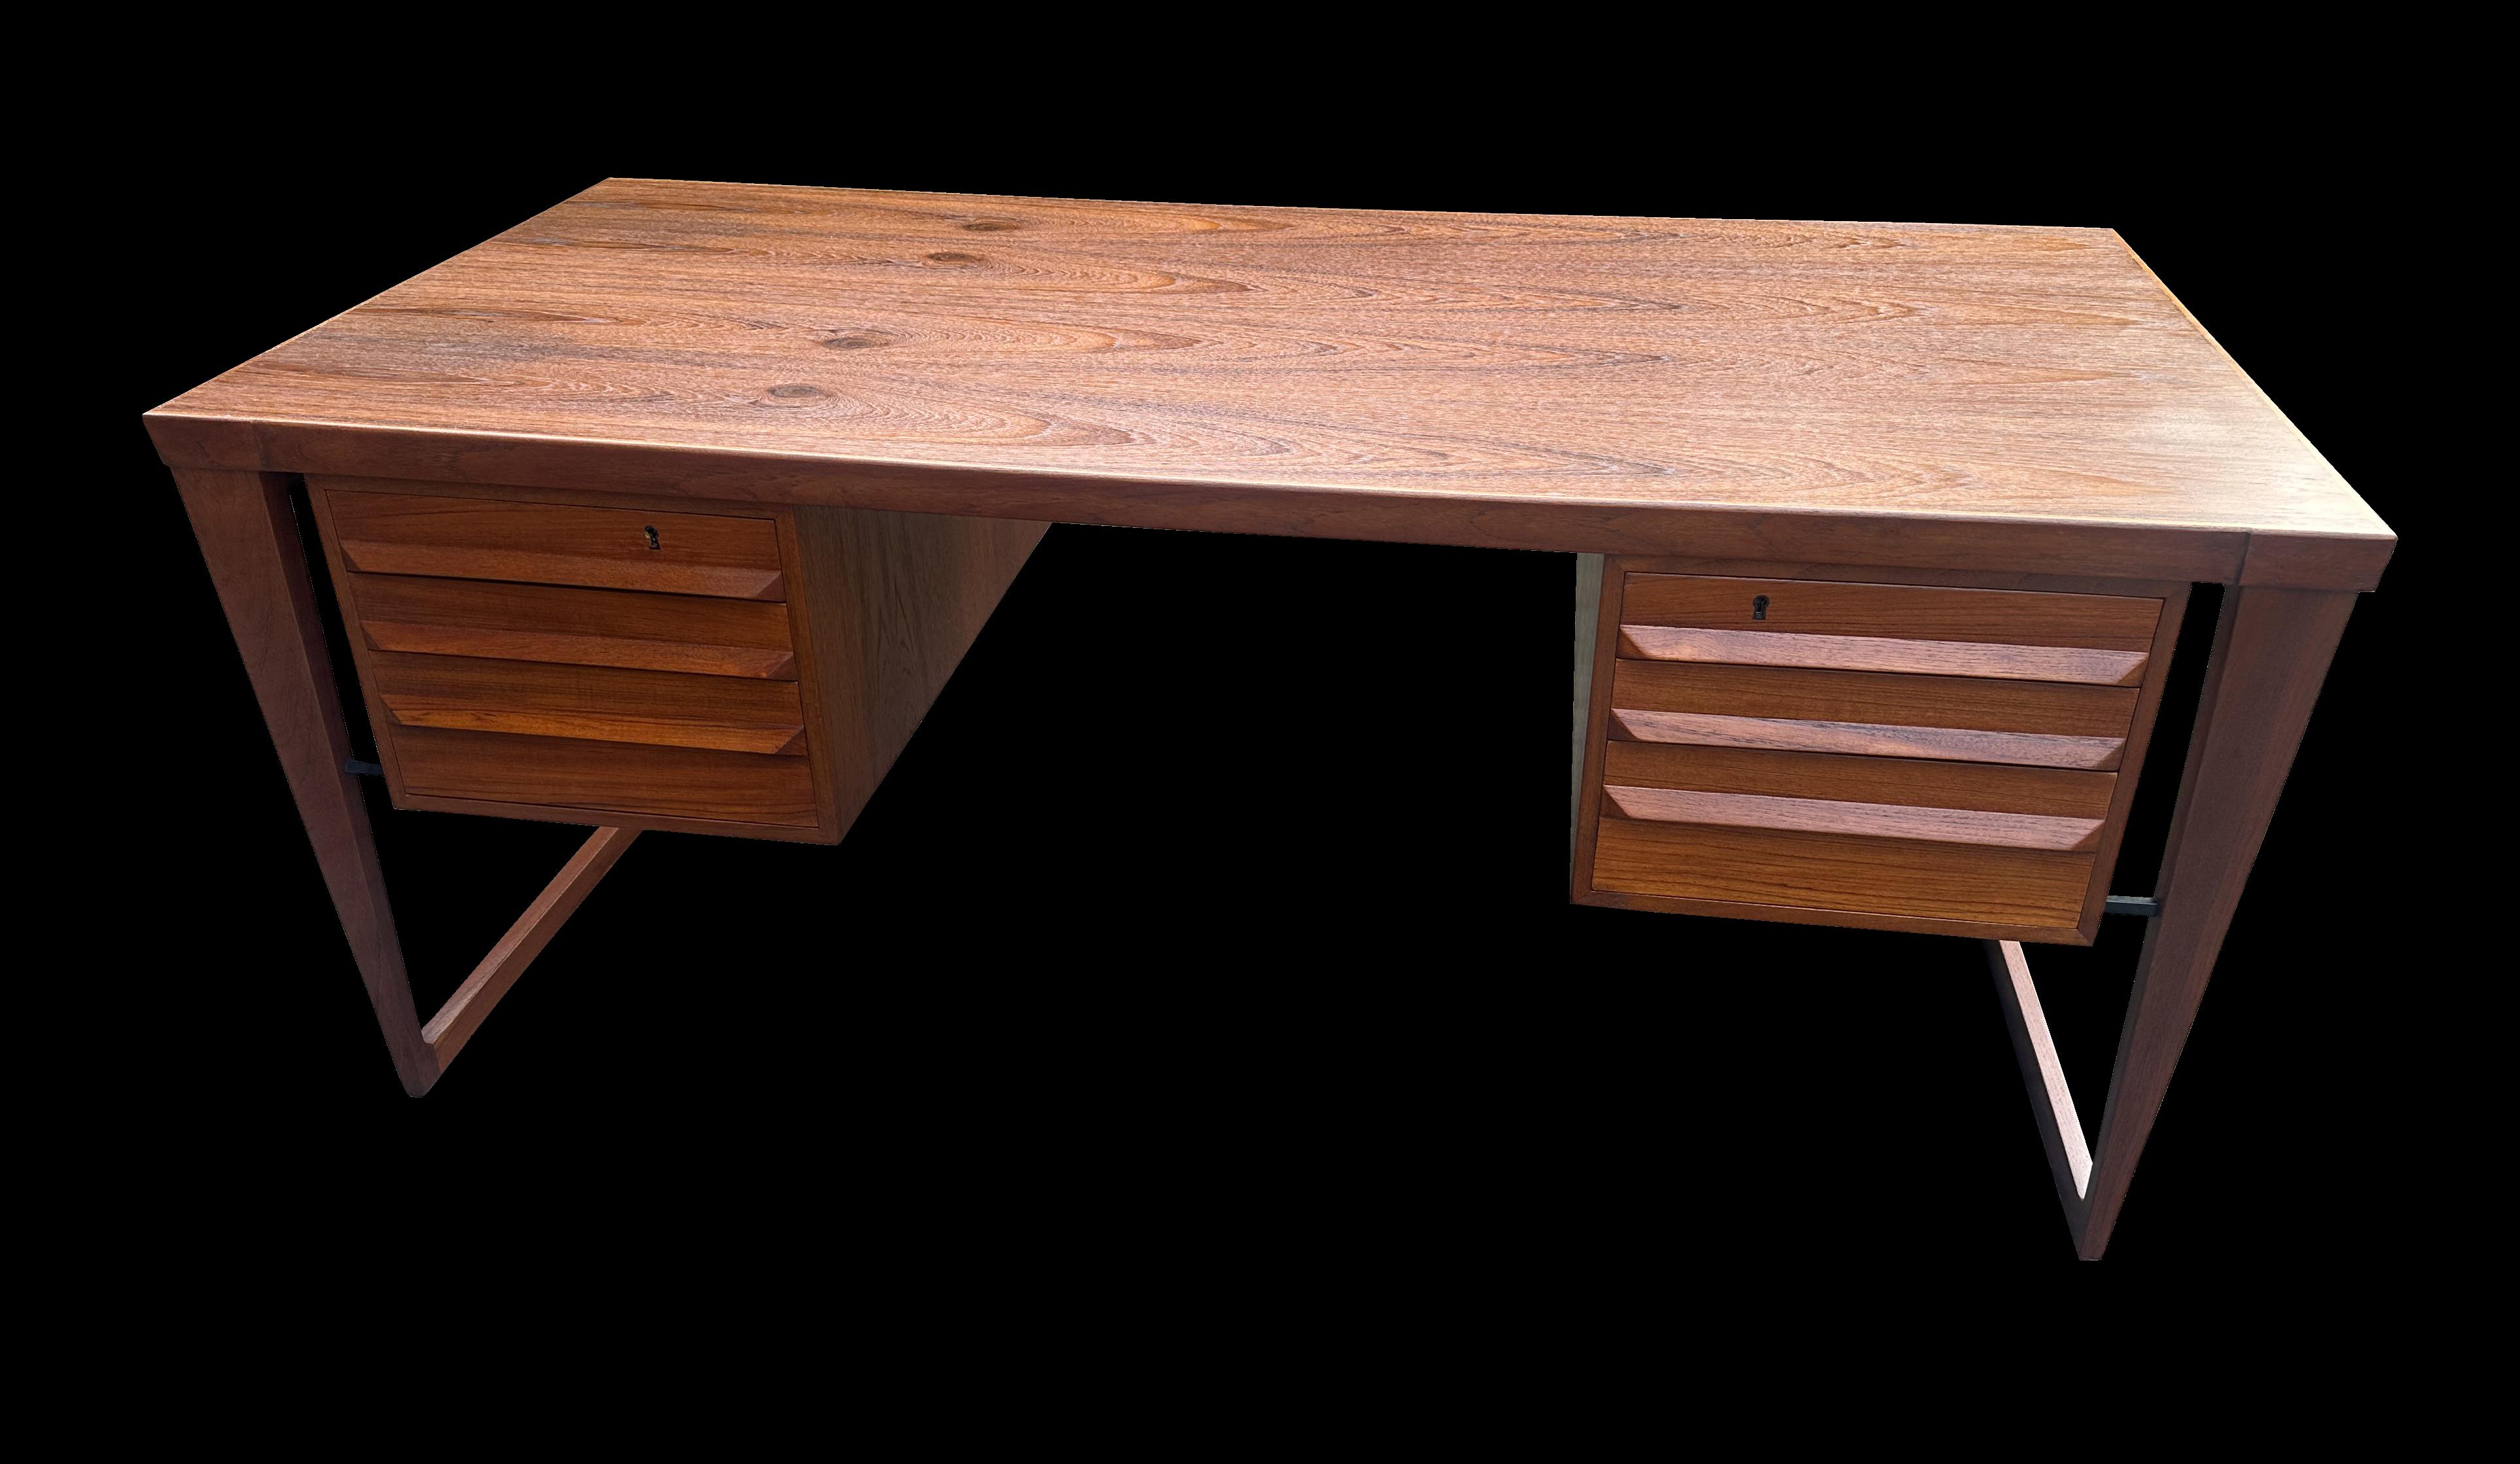 An excellent example of this desk from Kai Kristiansen, produced by Feldballes Møbelfabrik in the 1960's